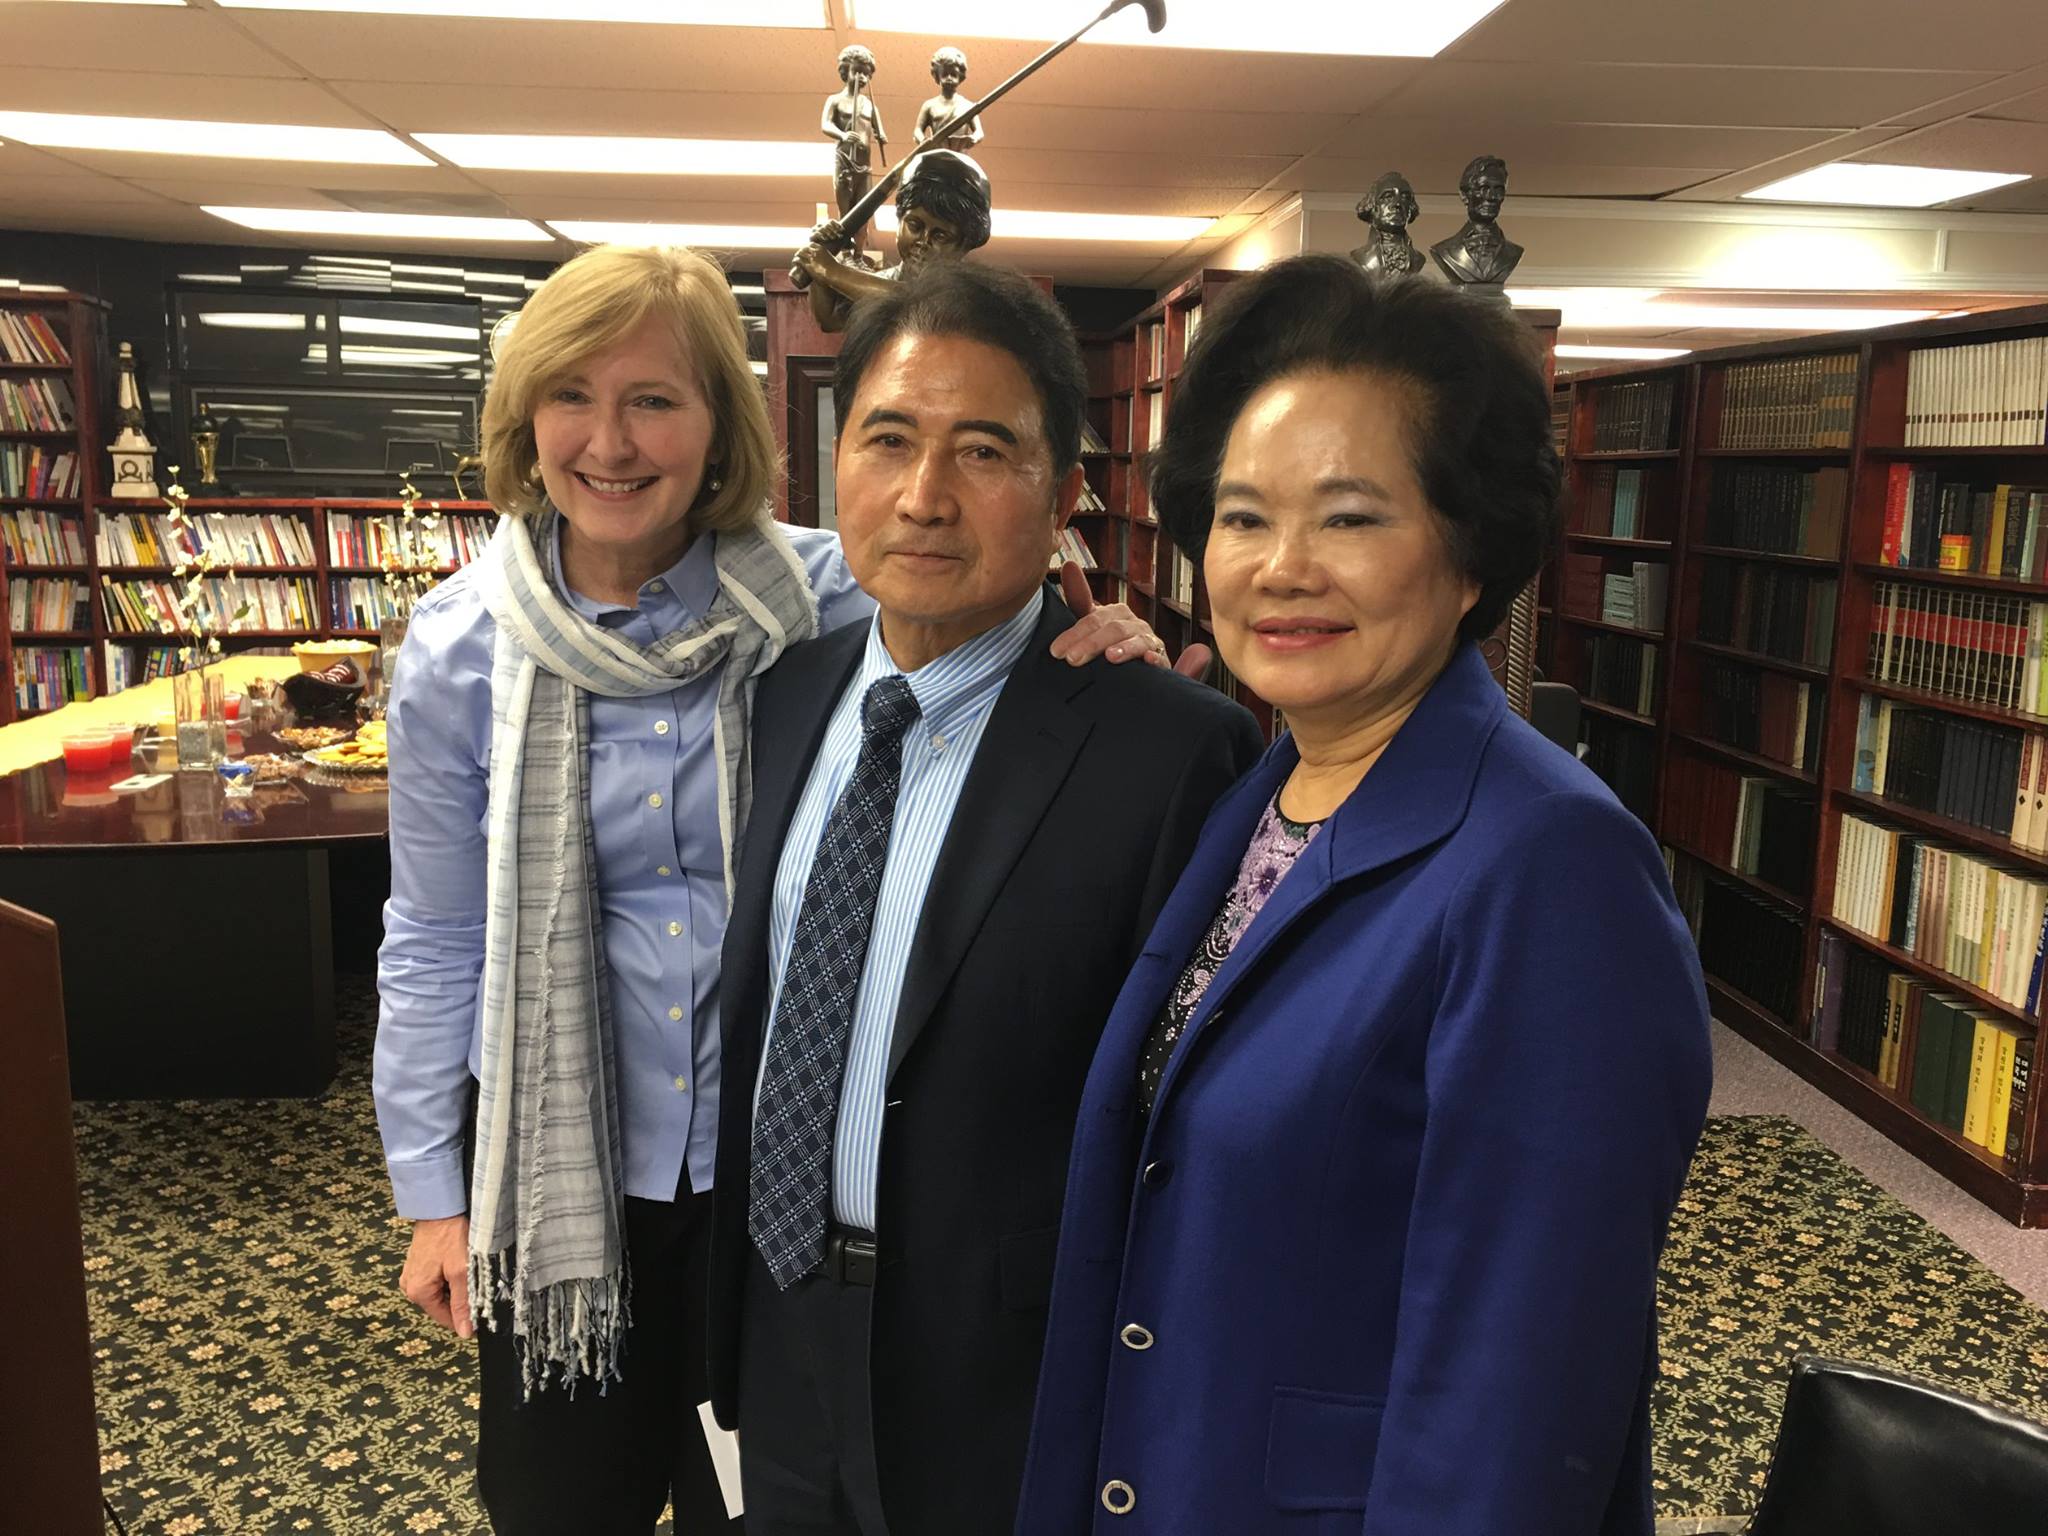 At a her book launch event at the Asian Herald Library in Charlotte, author of The Blu Phenomenon, Catherine Pike Plough, presented her book to library founders and Asian community leaders the Chuns.